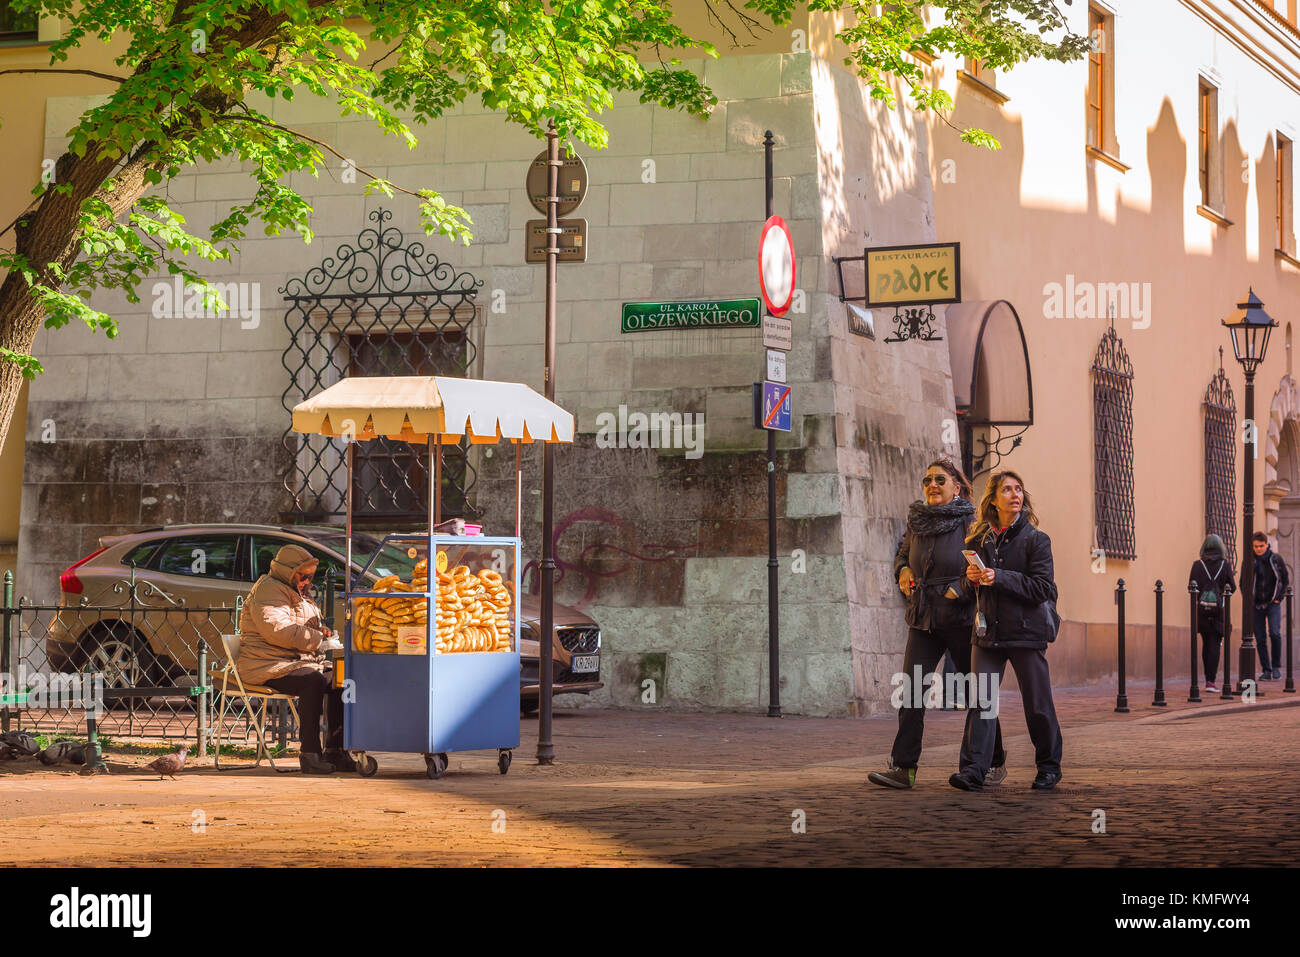 Krakow old town, view of two mature women tourists strolling past a pretzel stand in a square in the old town (Stare Miasto) quarter of Krakow, Poland Stock Photo